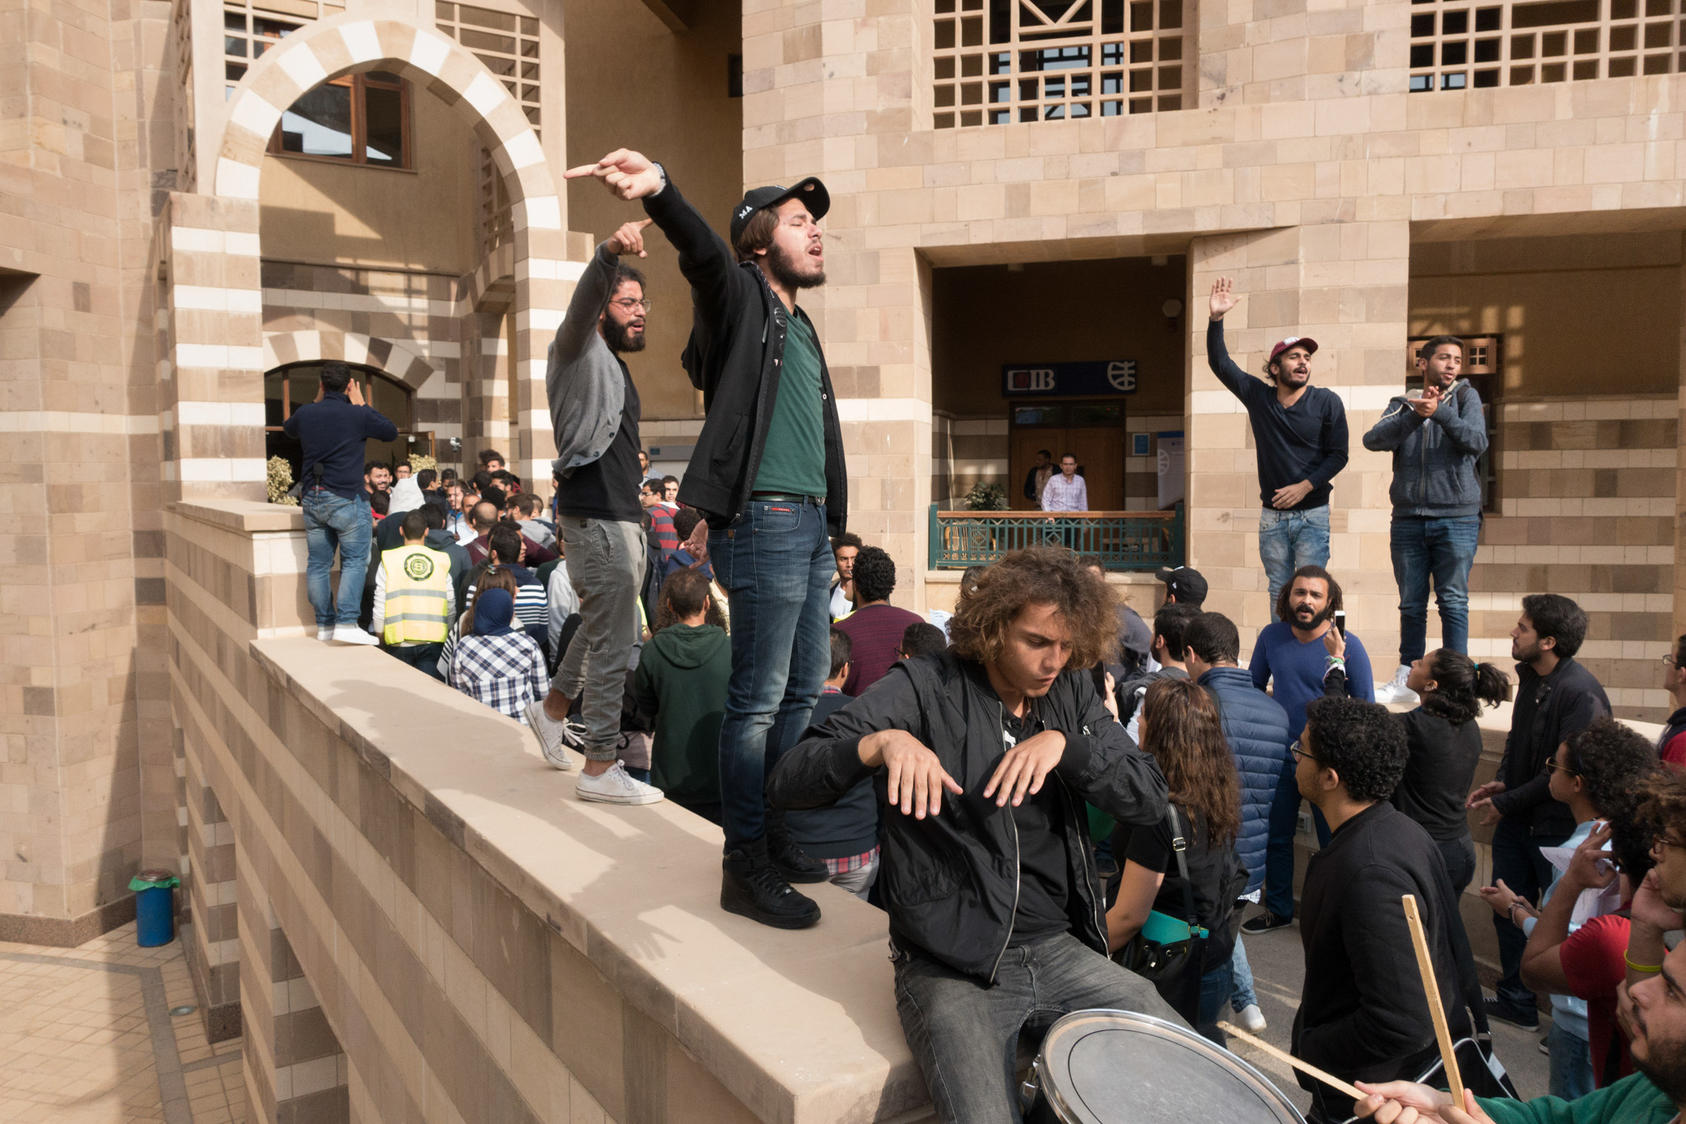 Students protest at the American University of Cairo, demanding a cap to their tuition, in Cairo, Nov. 16, 2016. The demonstrations are the largest and longest-running at the elite institution in years. “When the economic crisis hits the elite, it means the suffering is all over the place,” said Malak Rostom, vice president of the student union. (David Degner/The New York Times) 